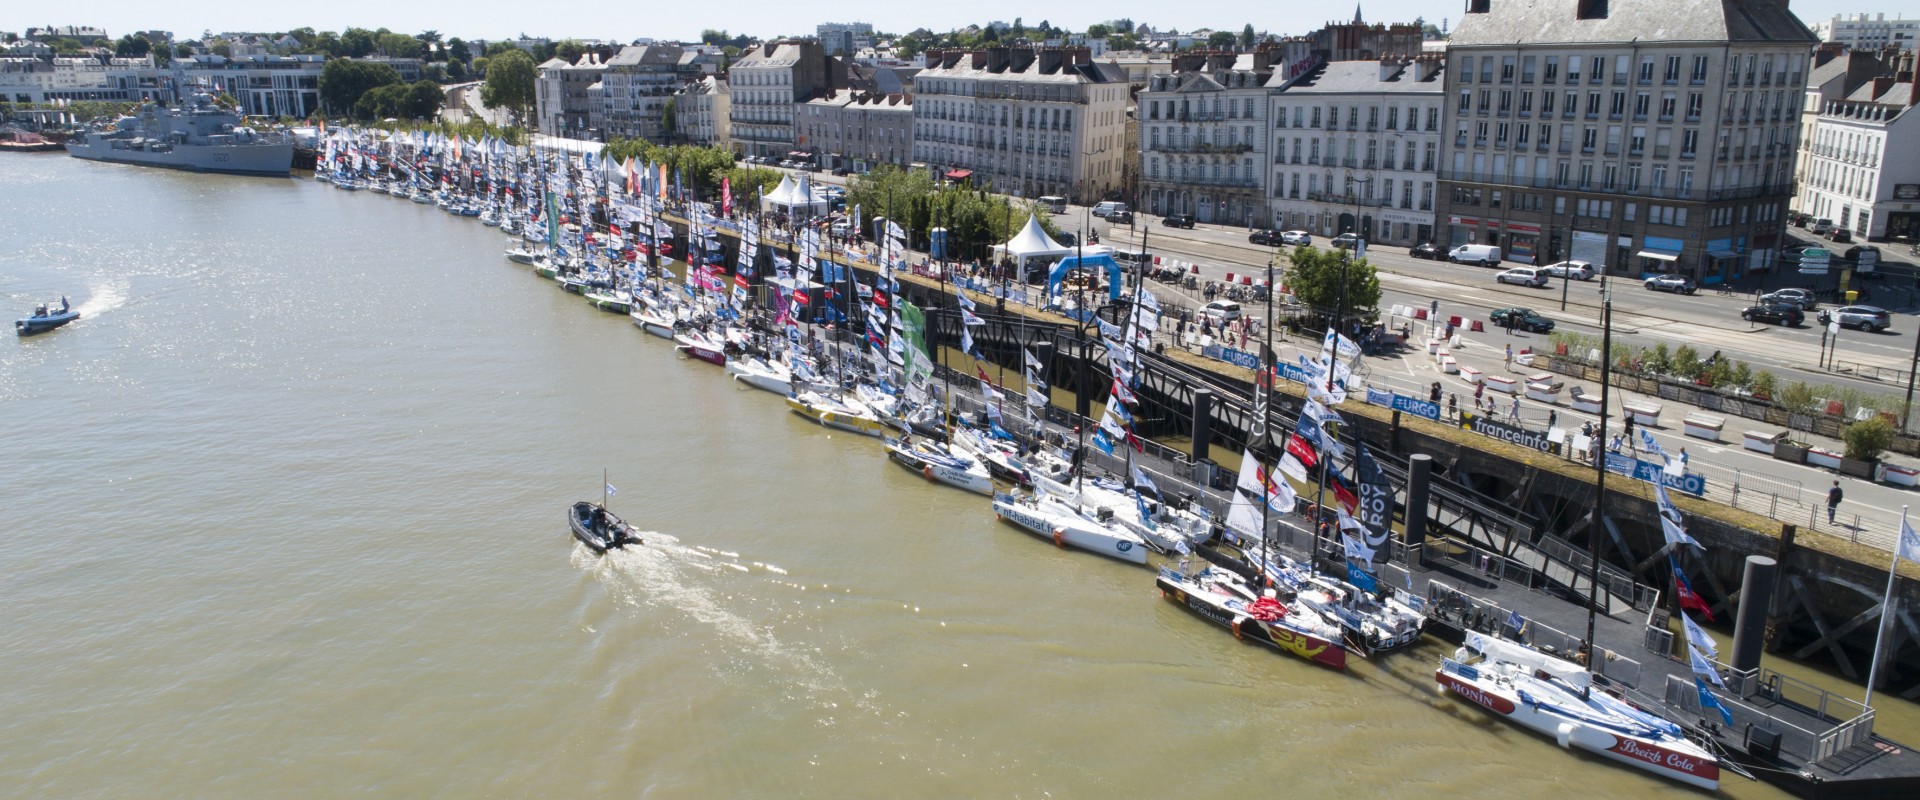 The Solitaire du Figaro Returns to the Estuary